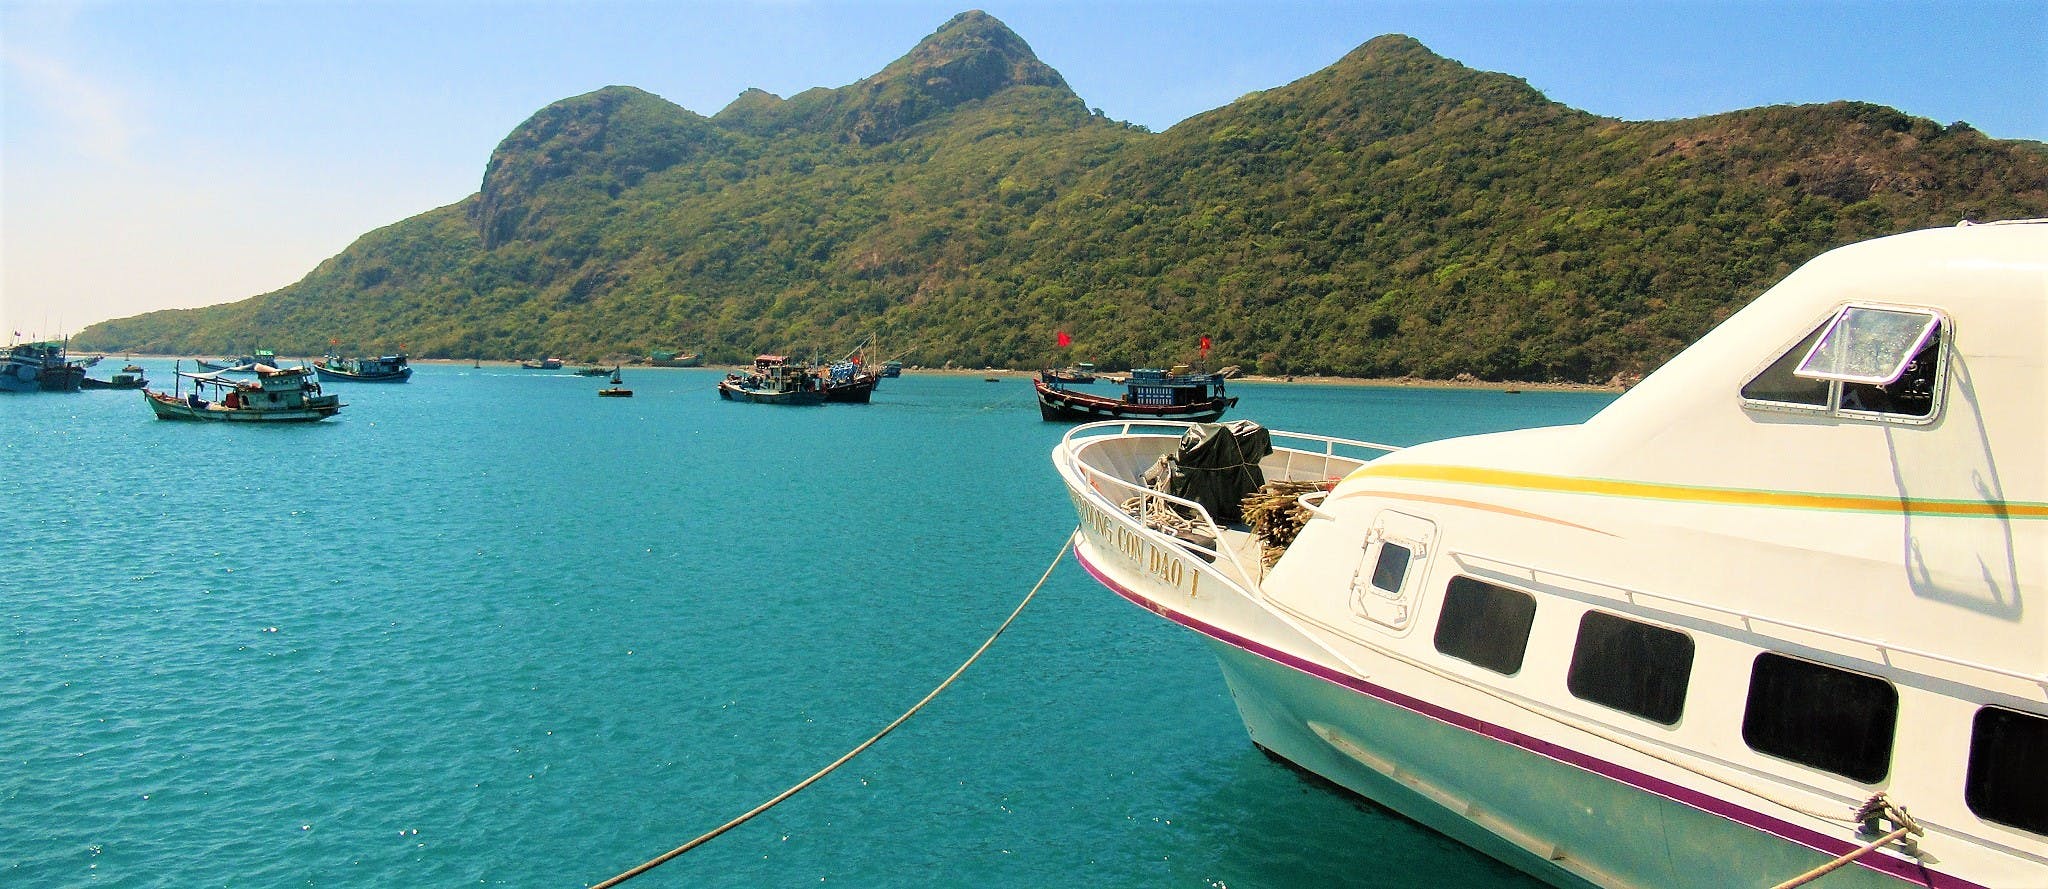 Soc Trang to Con Dao by Ferry: Passengers & Motorbikes, Vietnam